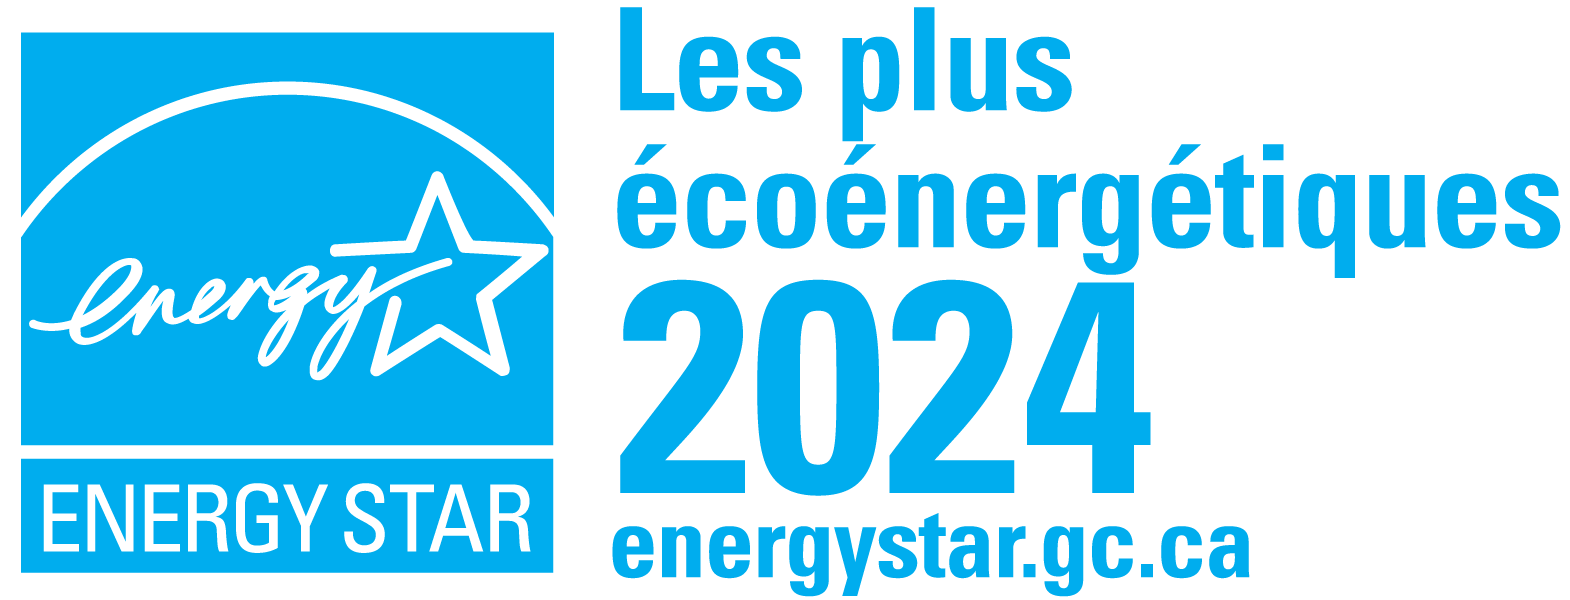 Energy Star's Most Efficient 2024